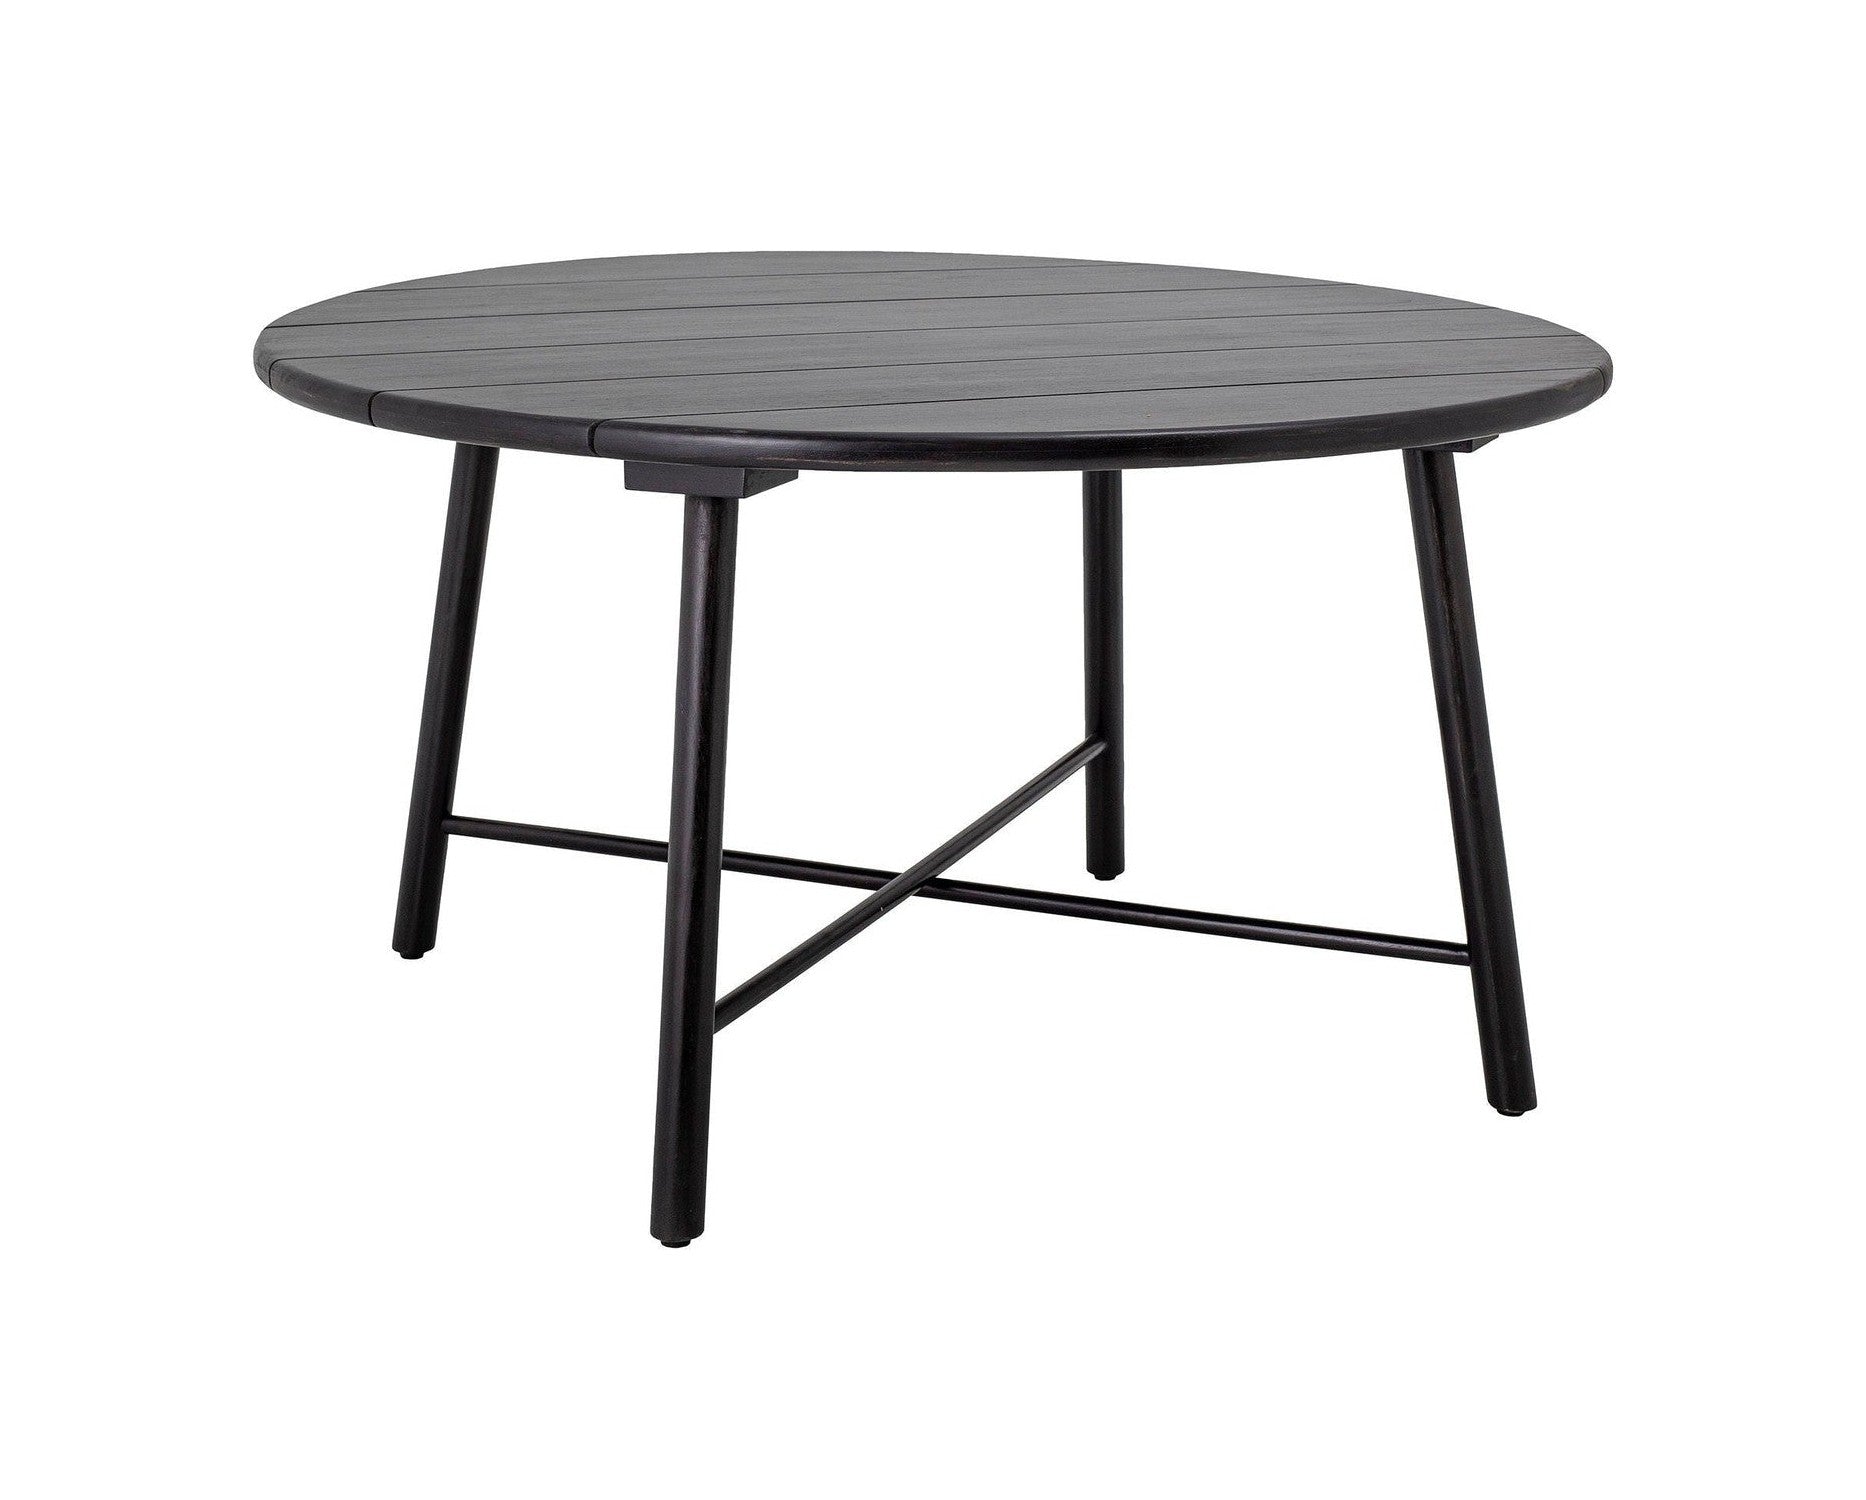 Creative Collection Lope Dining Table, Black, Acacia